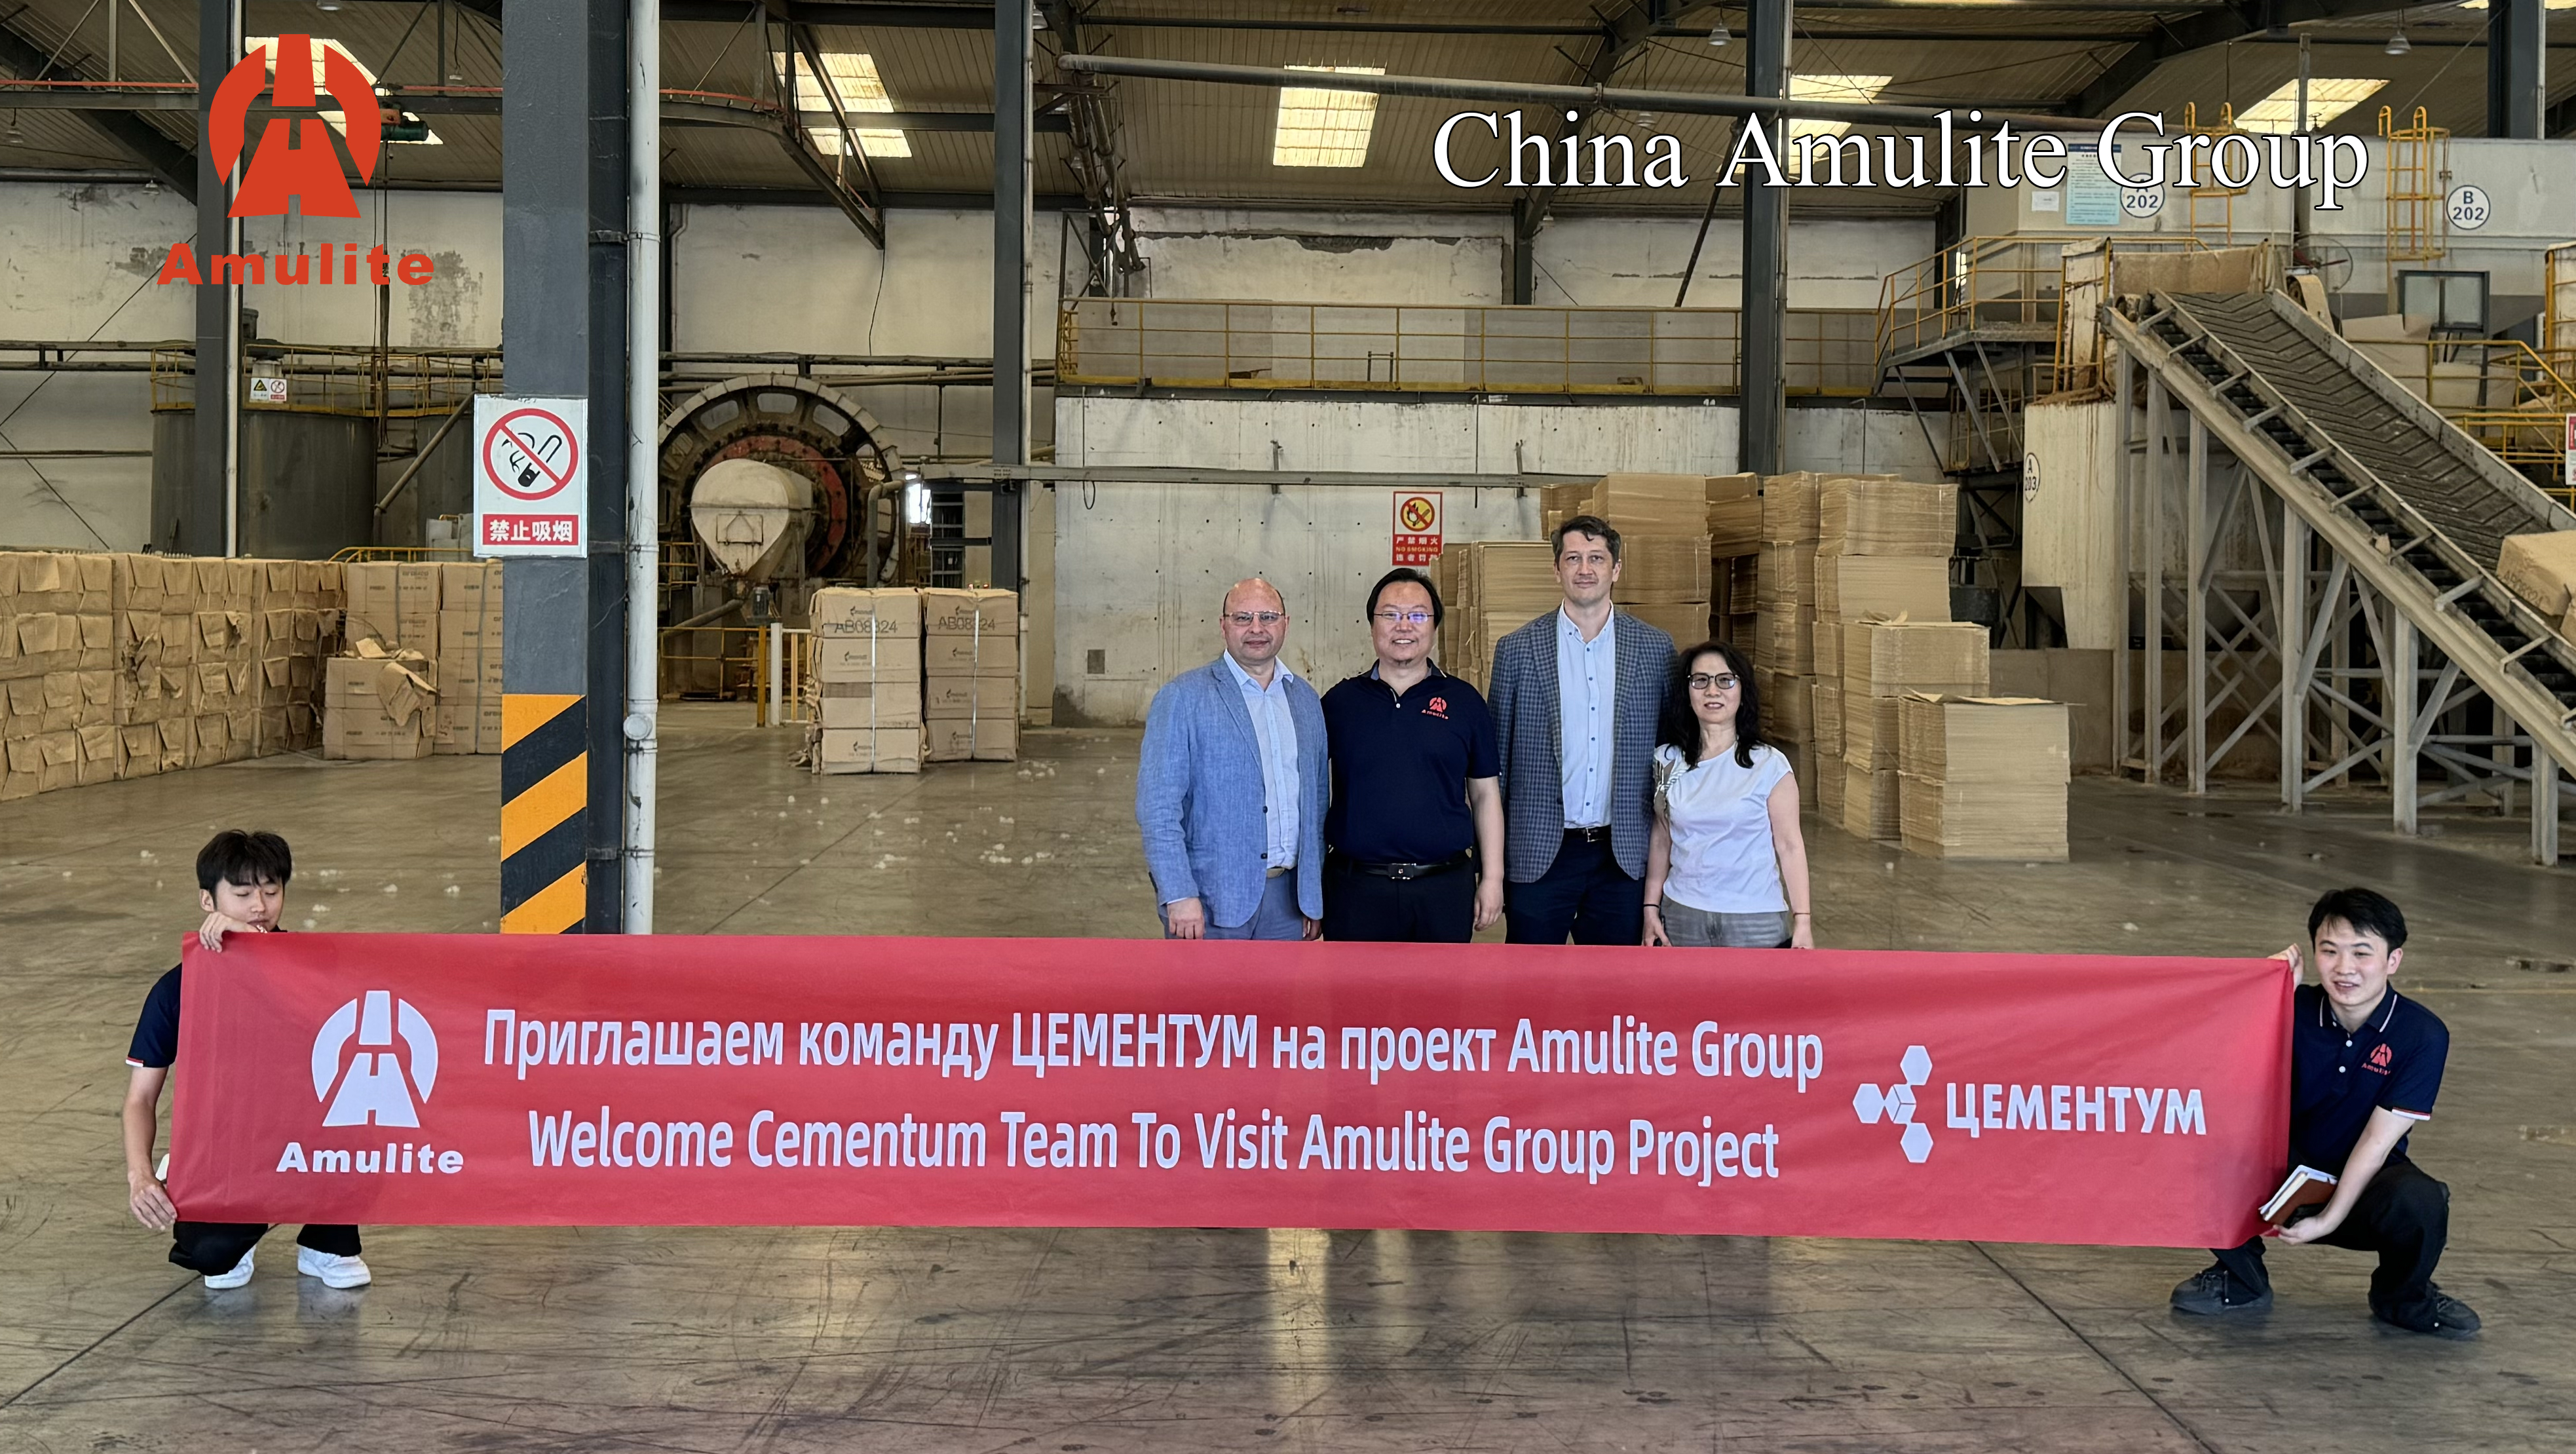 Amulitegroup Factory Welcomes the Visit of Cementum Team from Russia